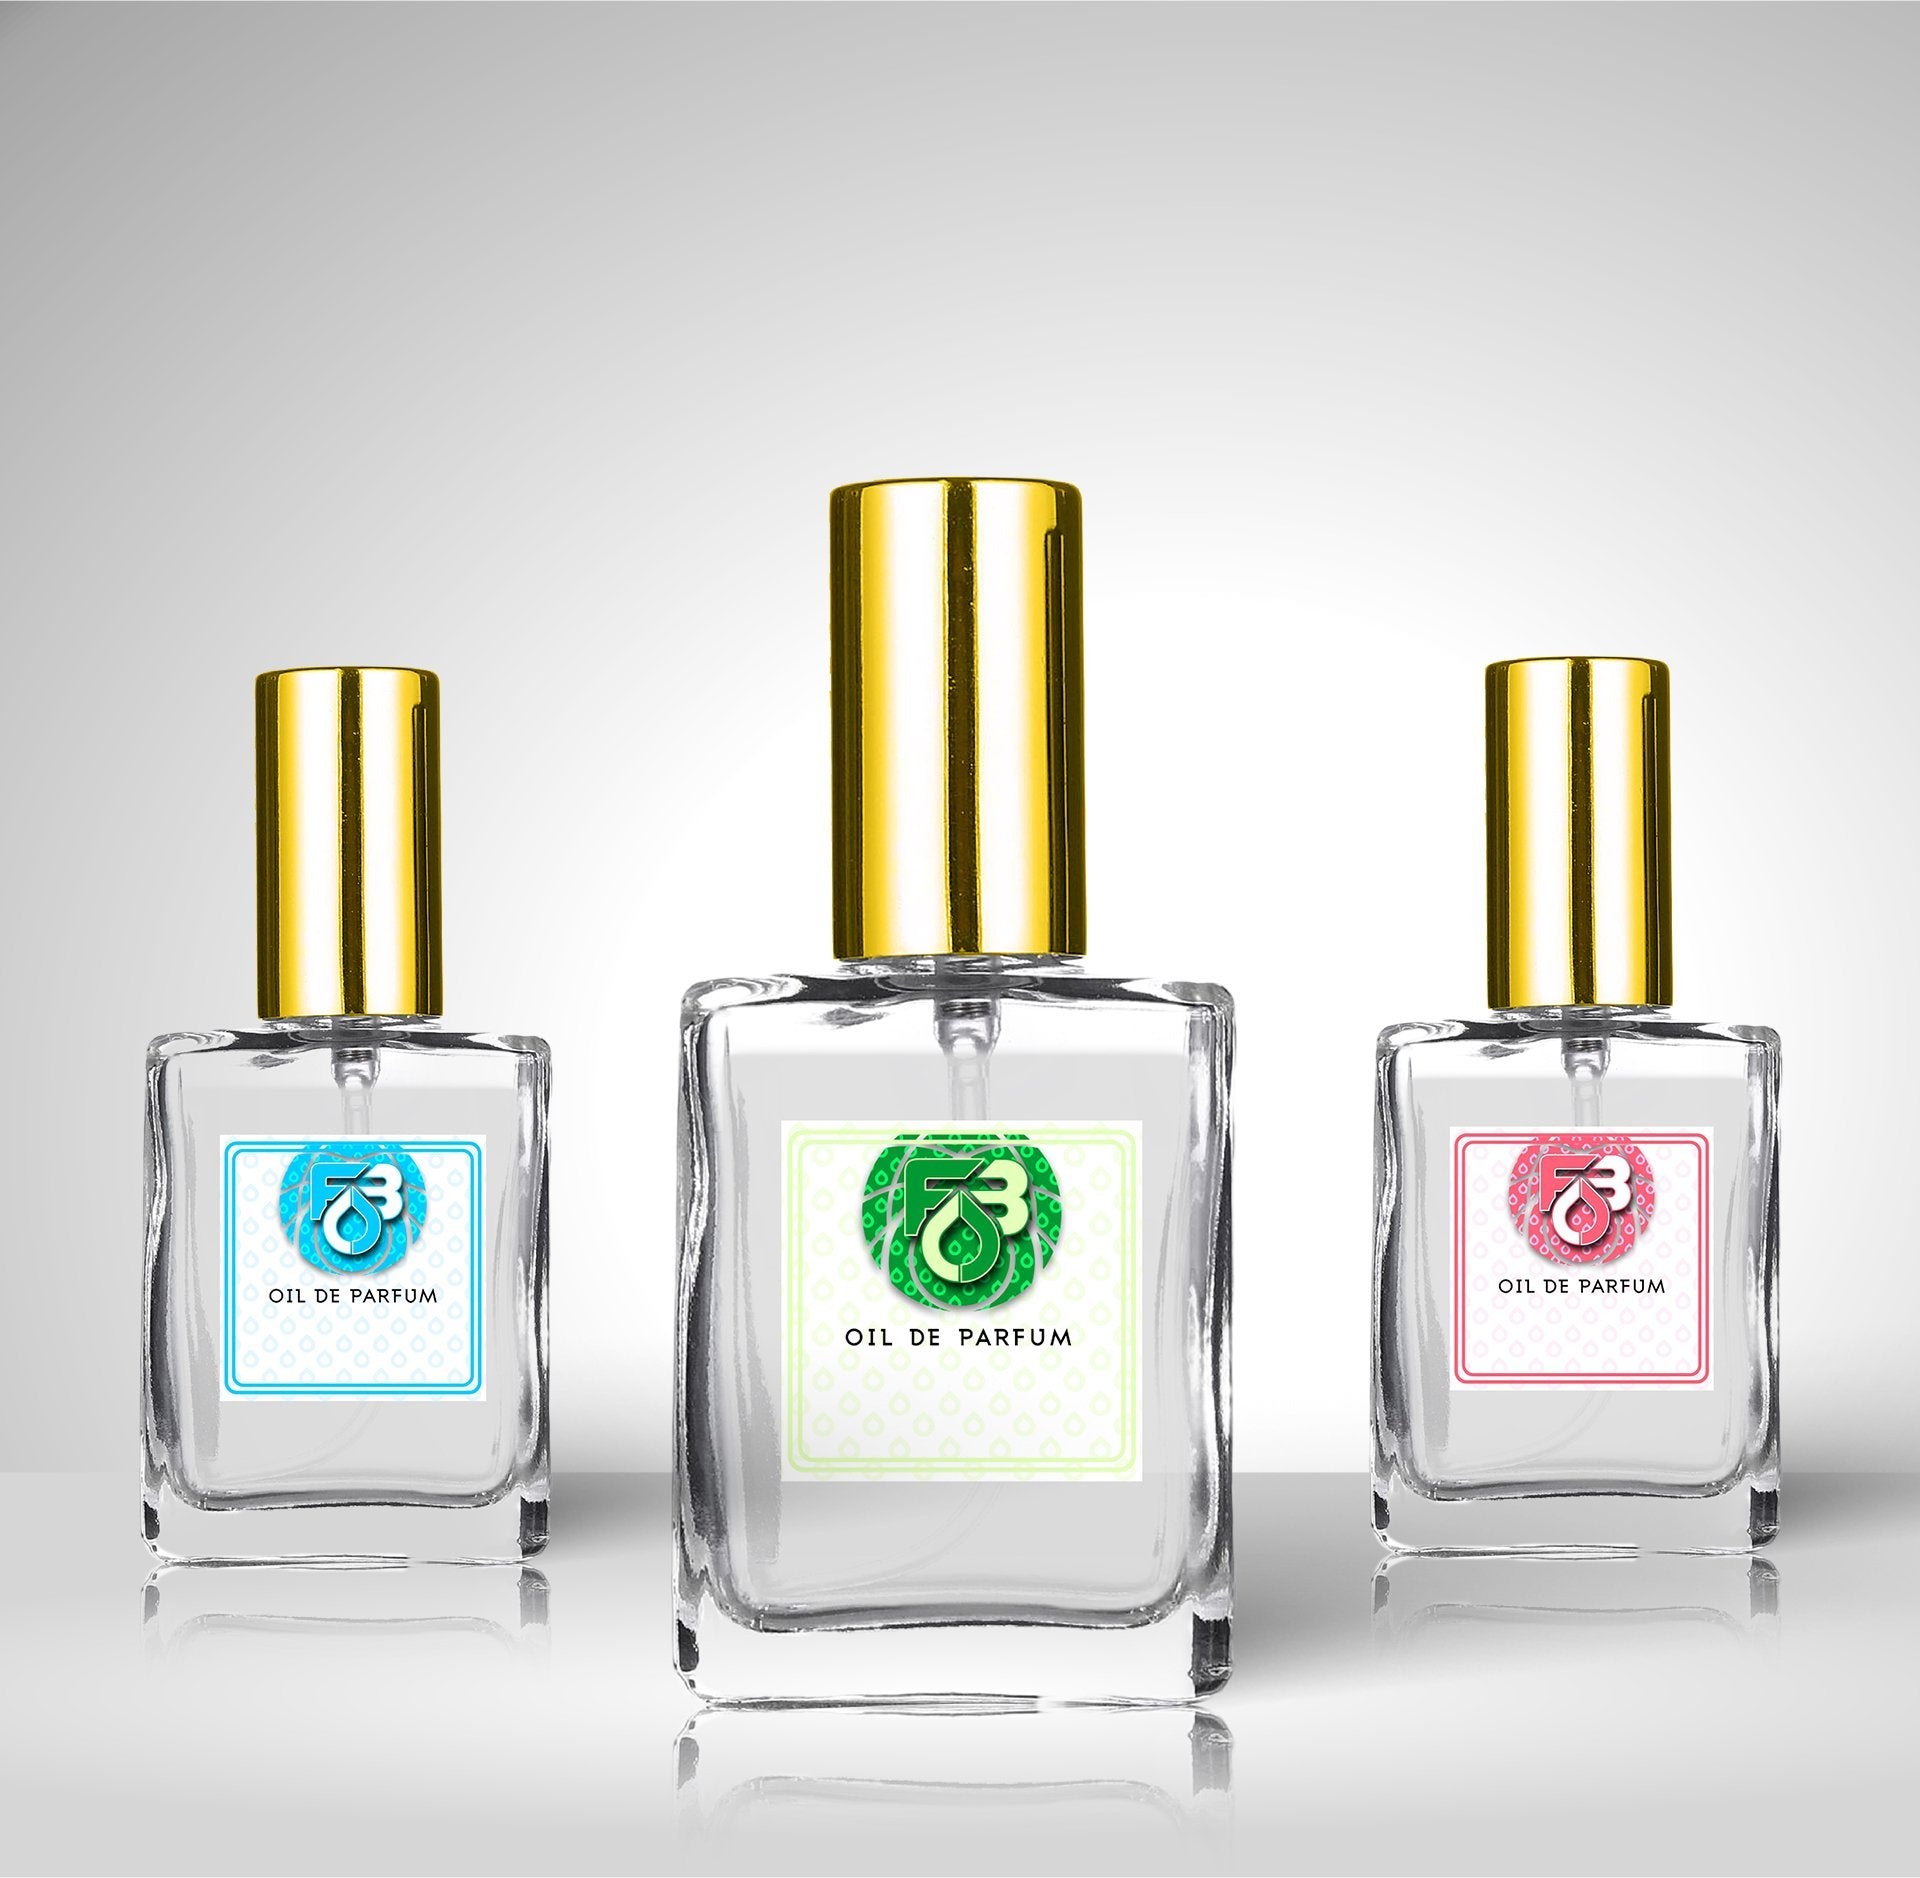 Compare Aroma to One Million Lucky®